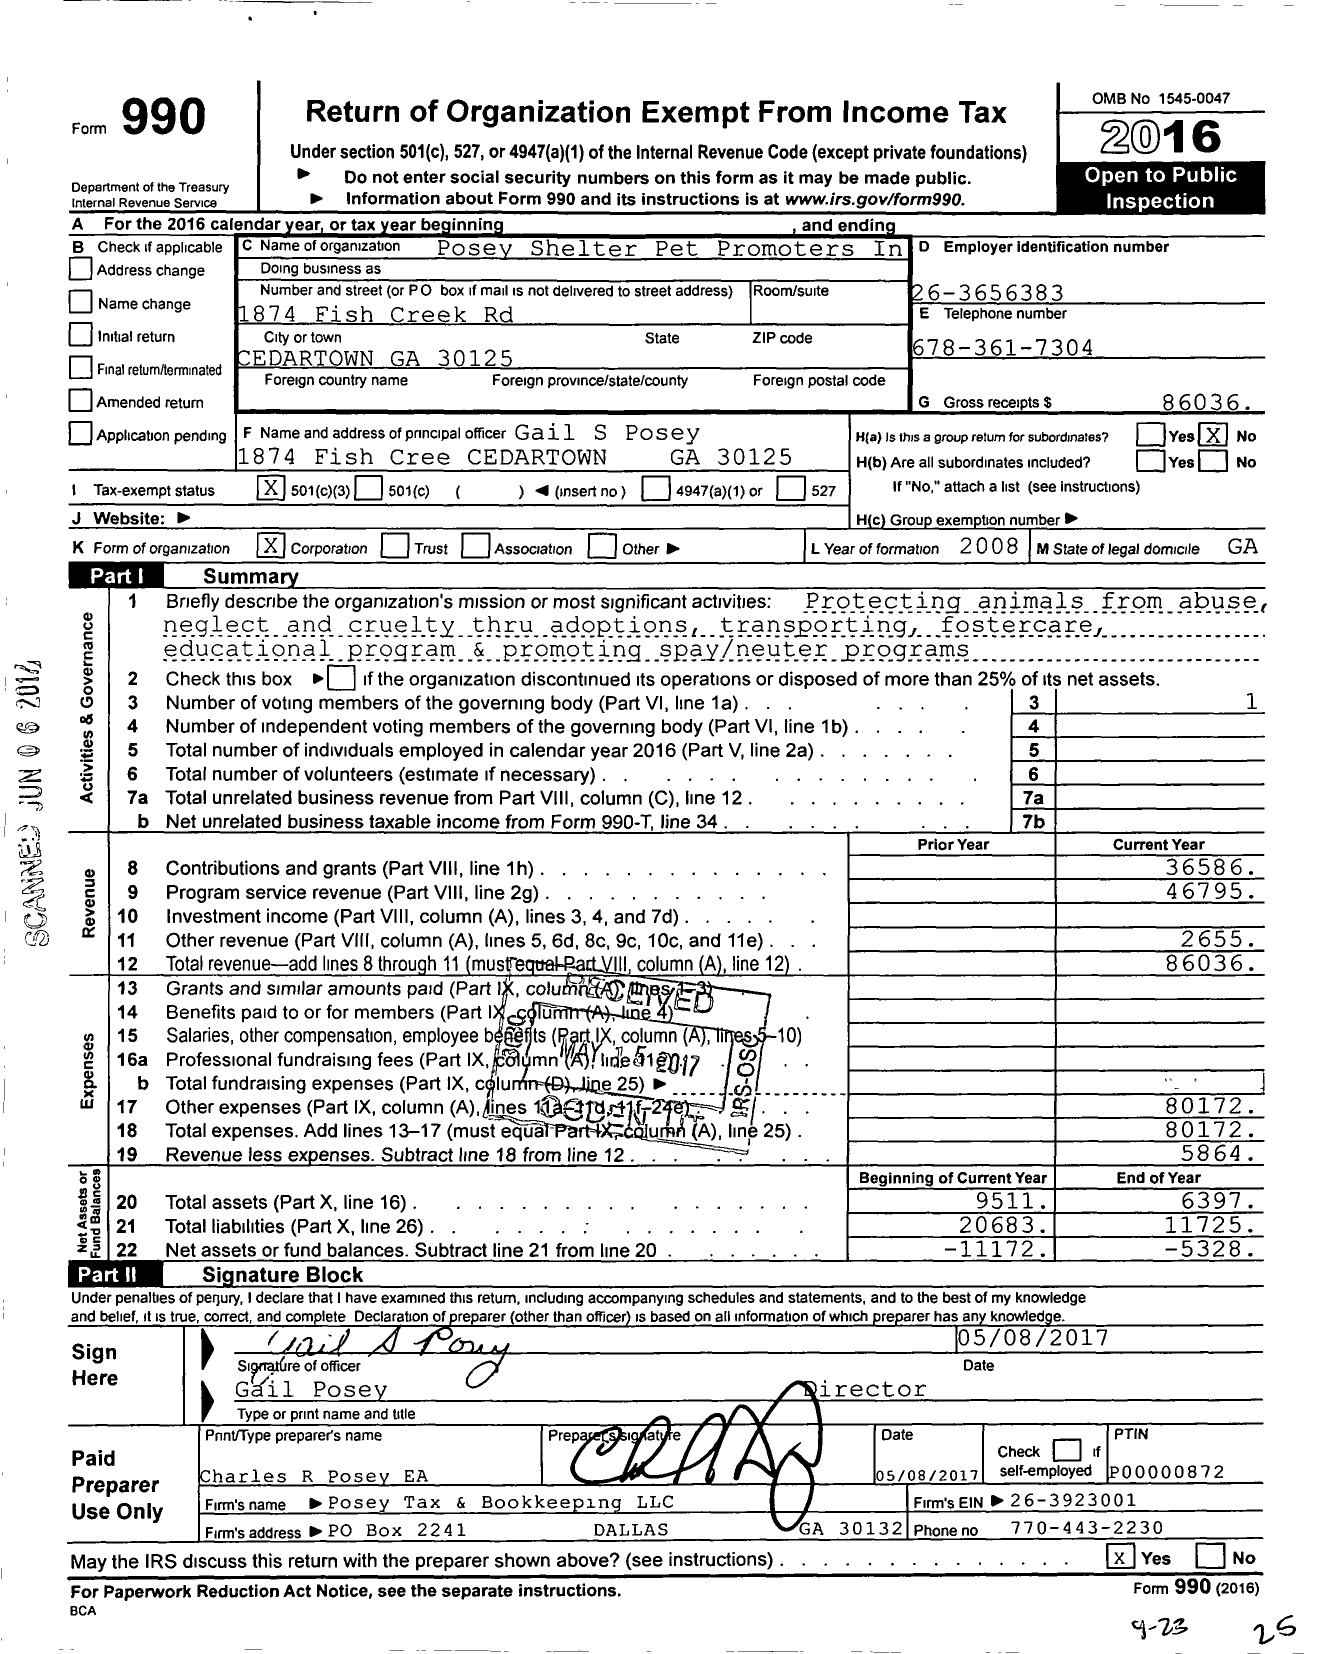 Image of first page of 2016 Form 990 for Posey Shelter Pet Promoters